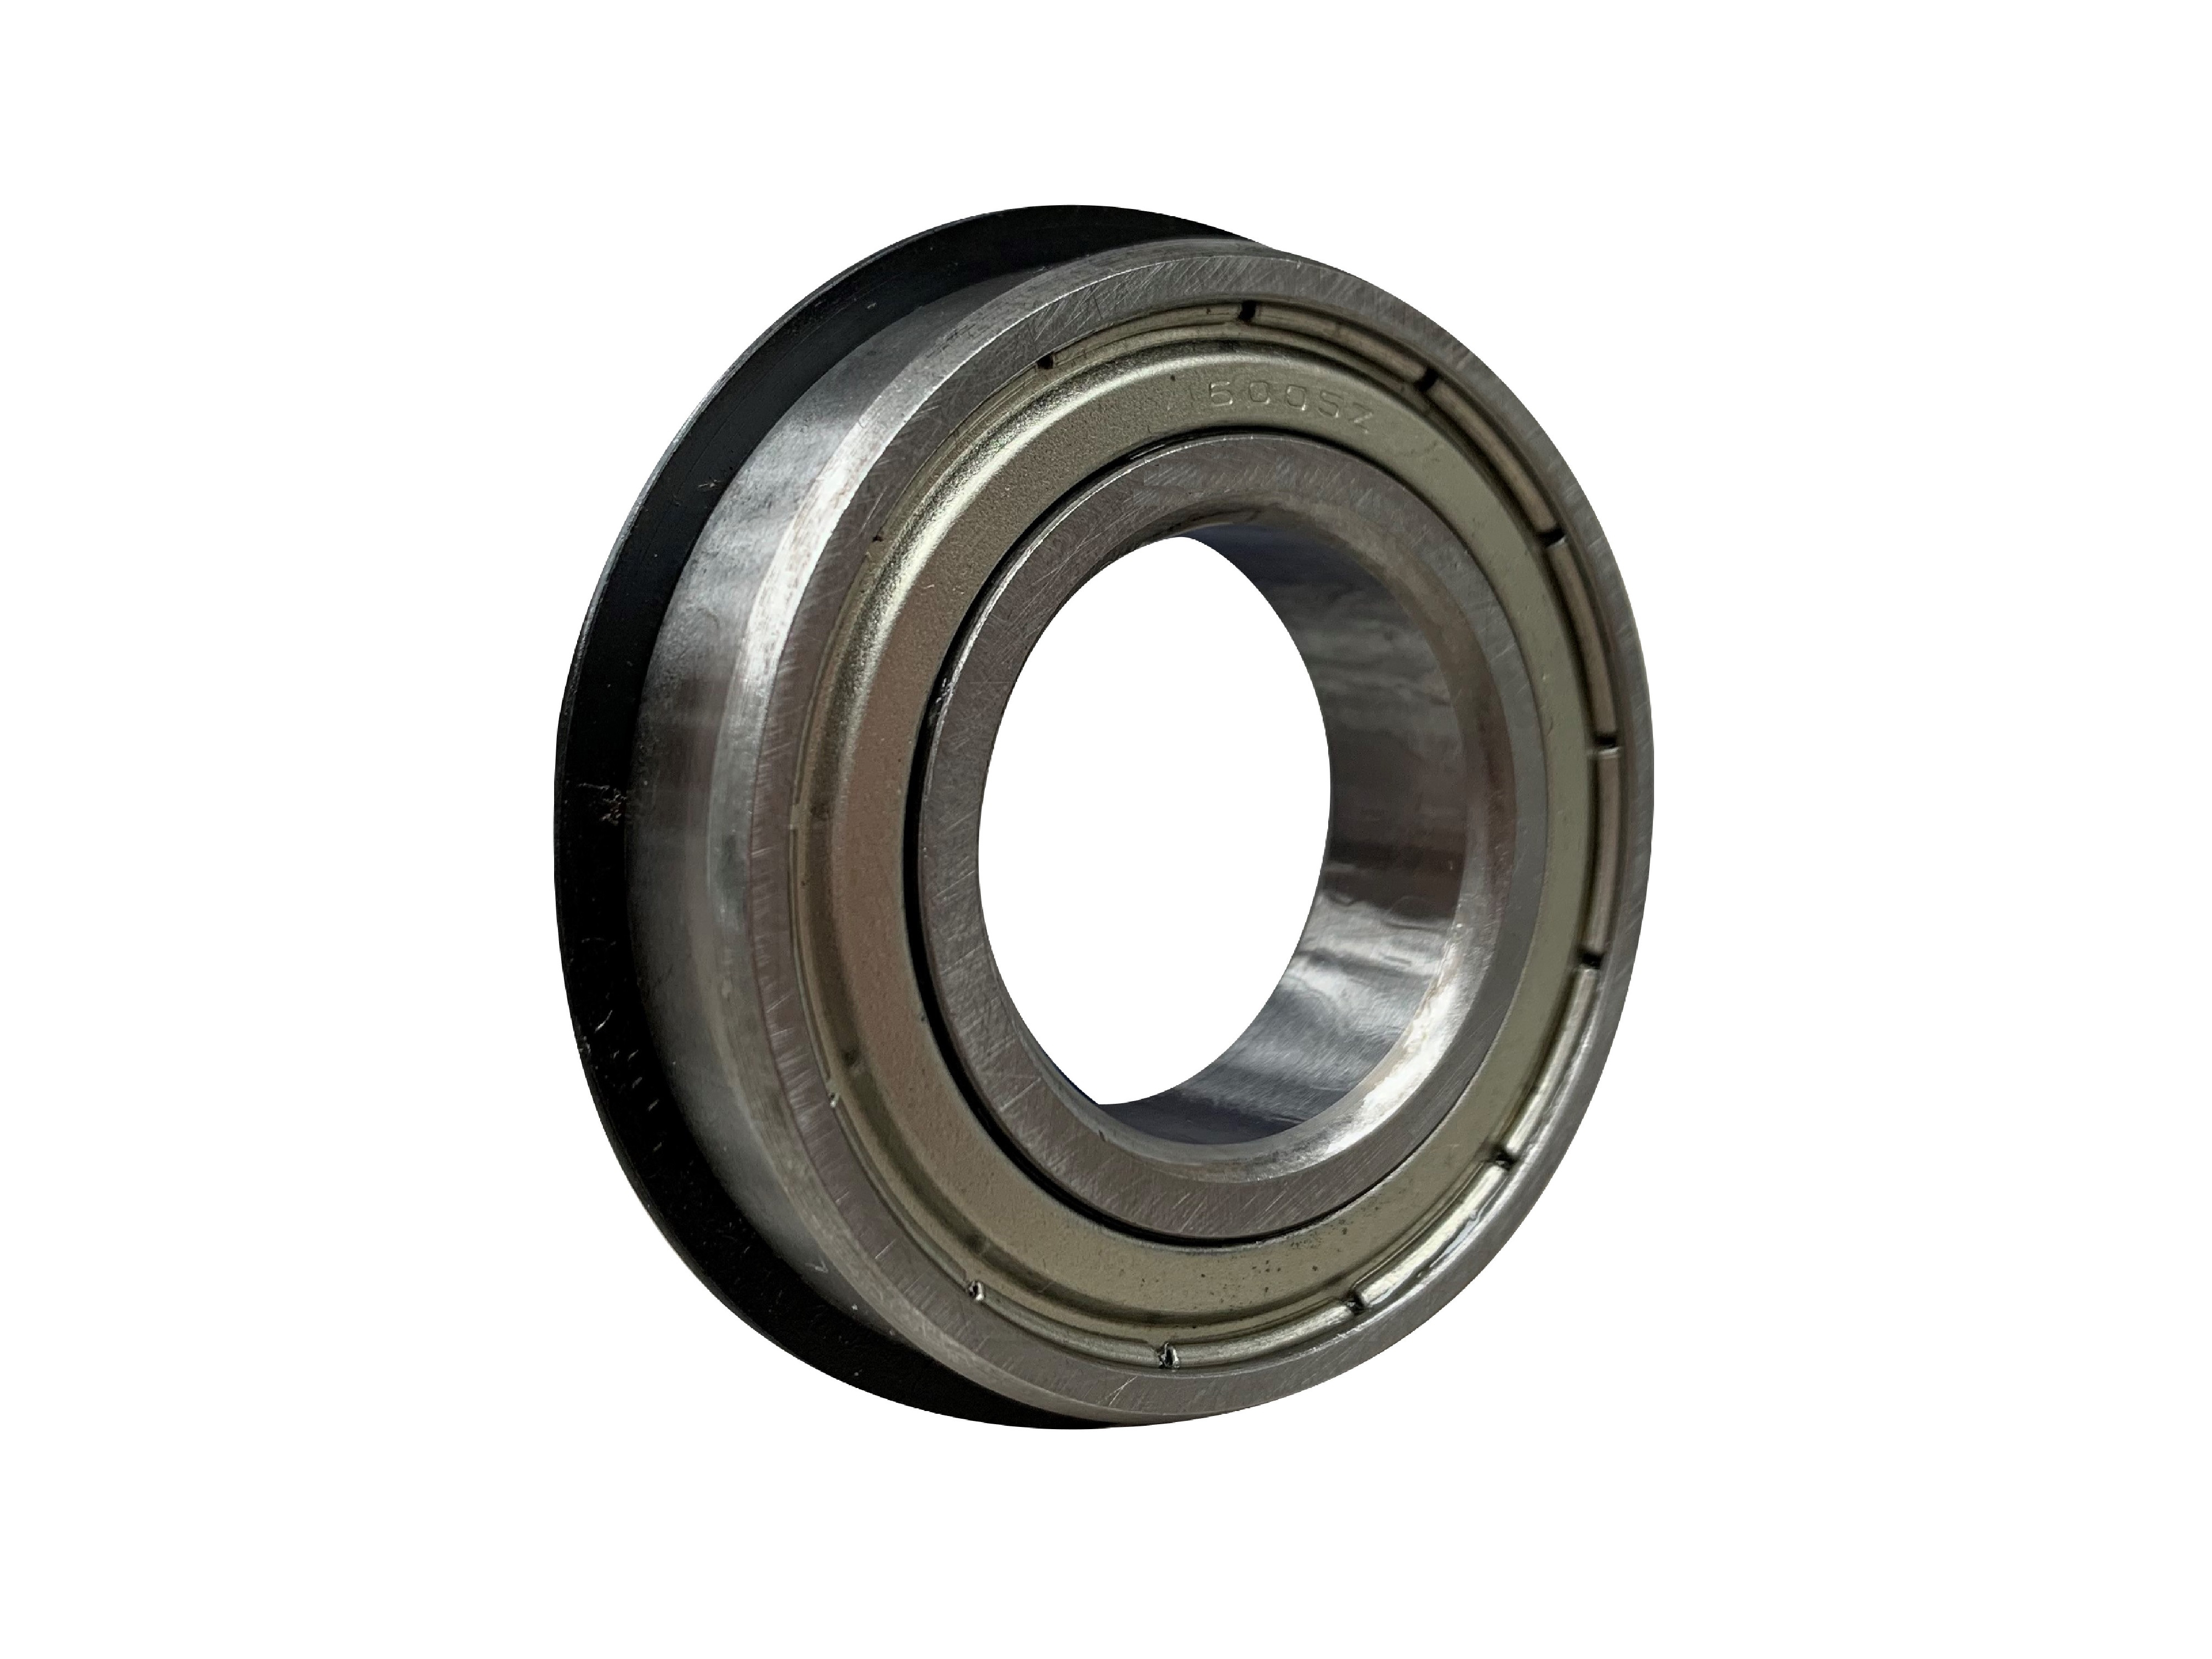 SKF 6306-2ZNR Shielded Ball Bearing With Snap Ring 30mm x 72mm x 19mm